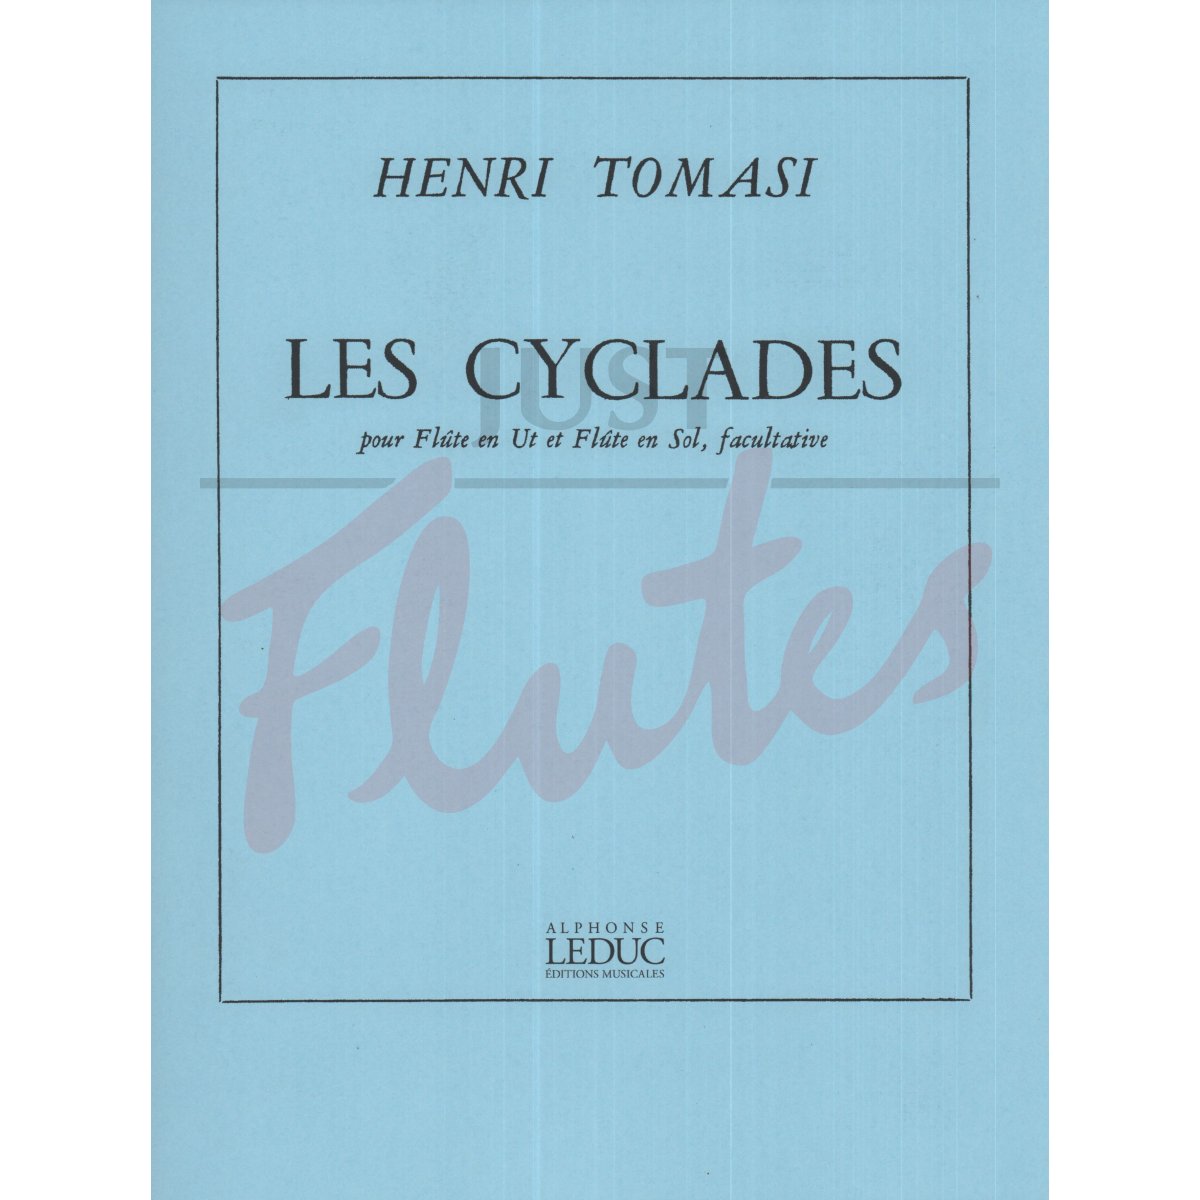 Les Cyclades for Solo Flute or Alto Flute